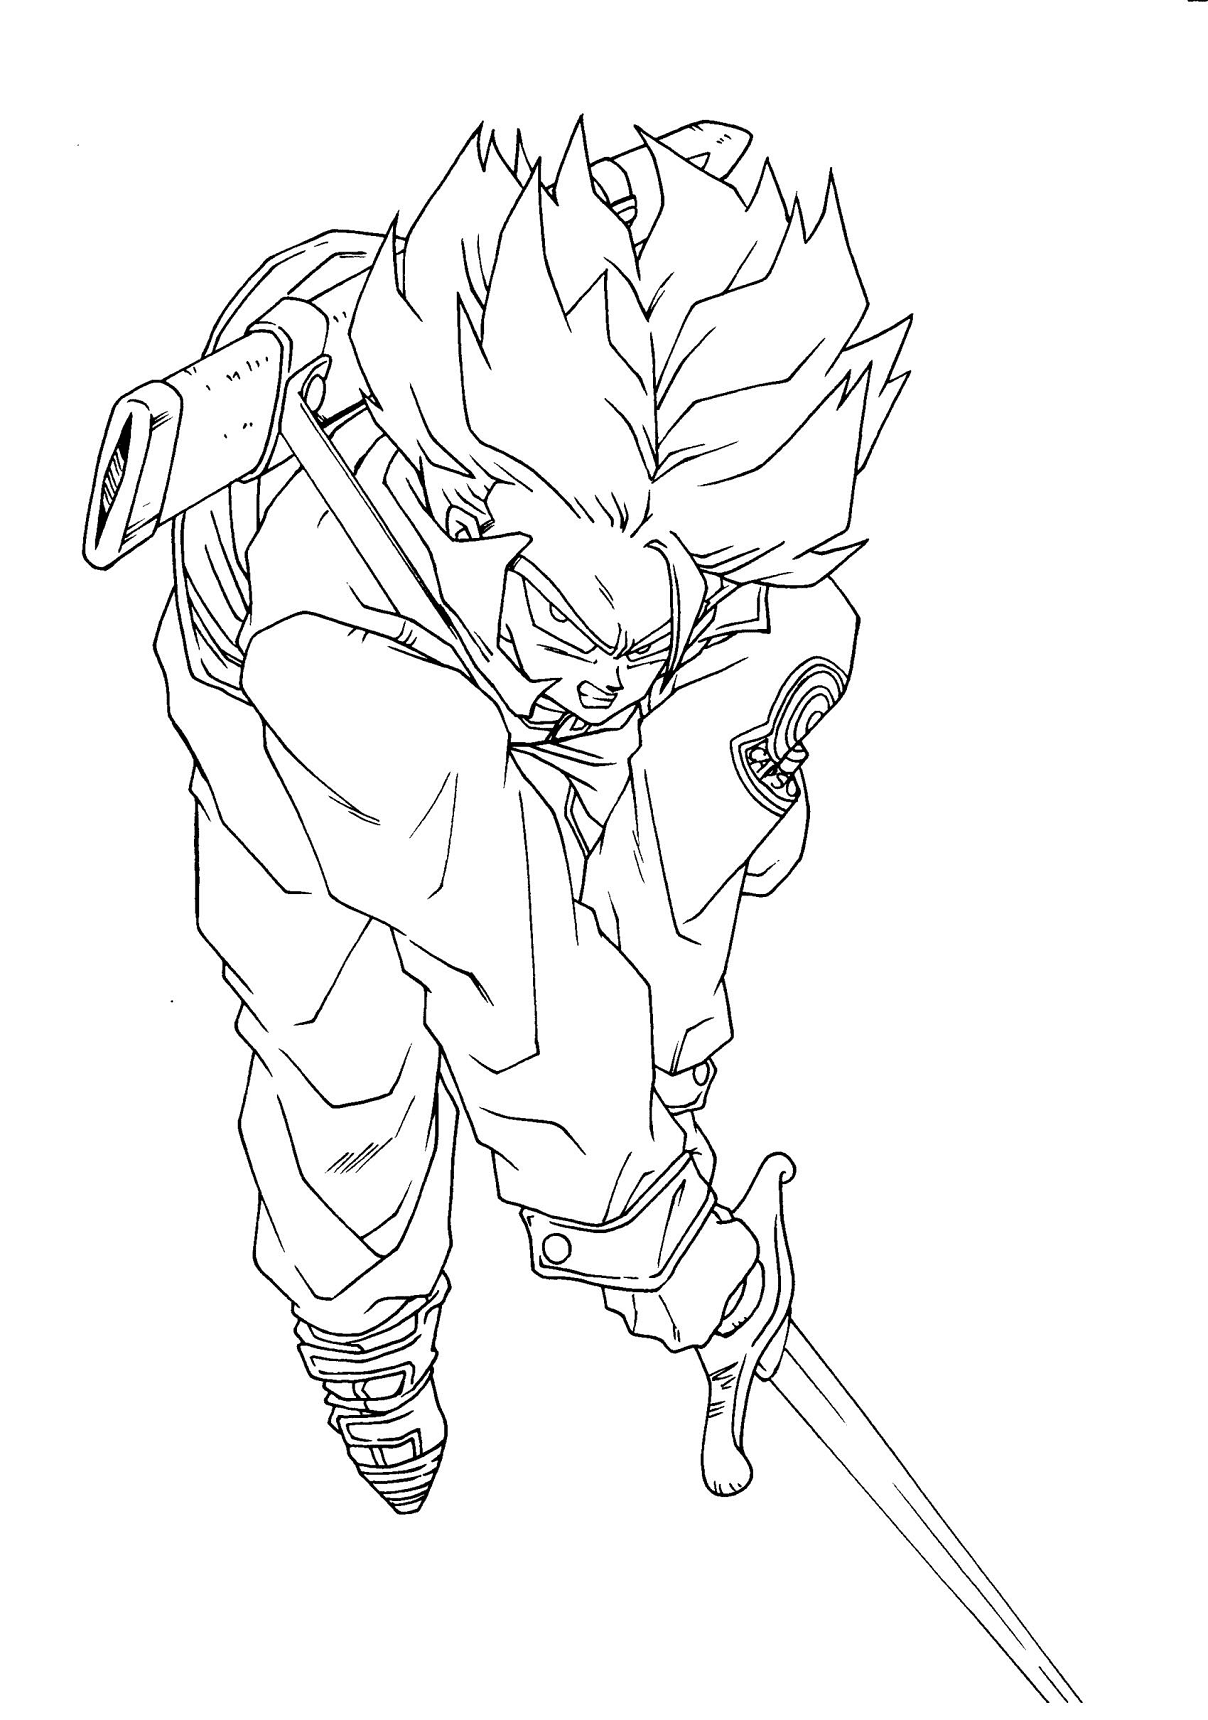 Trunks Coloring Page